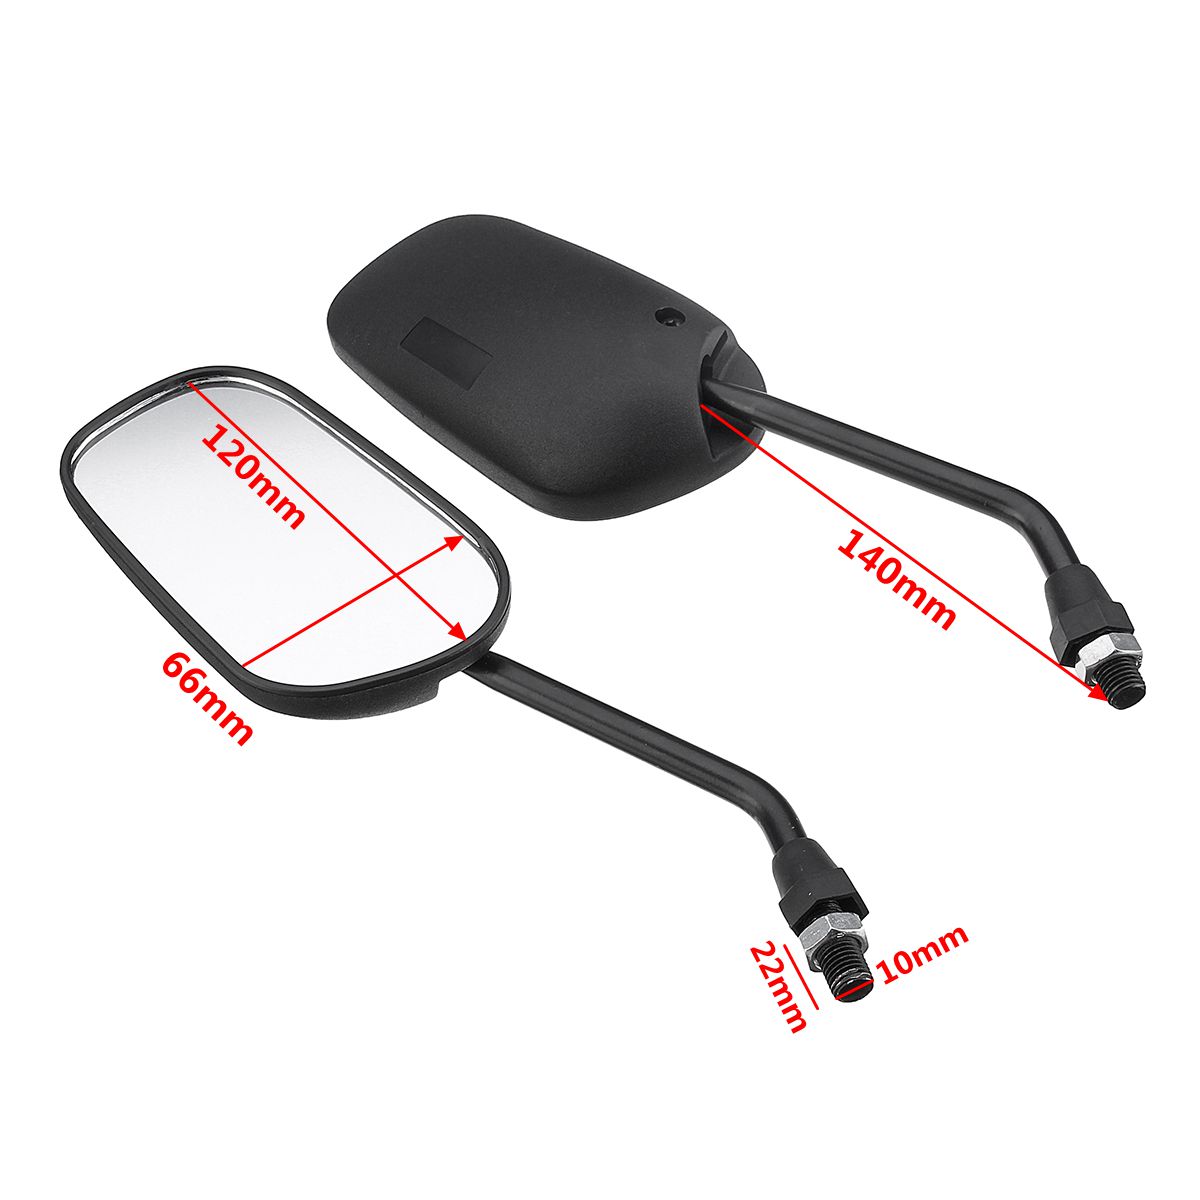 Pair air Left&Right Universal Motorcycle Mirror Scooter E-Bike Rearview Mirrors Electrombile Back Side Mirror SH-1667